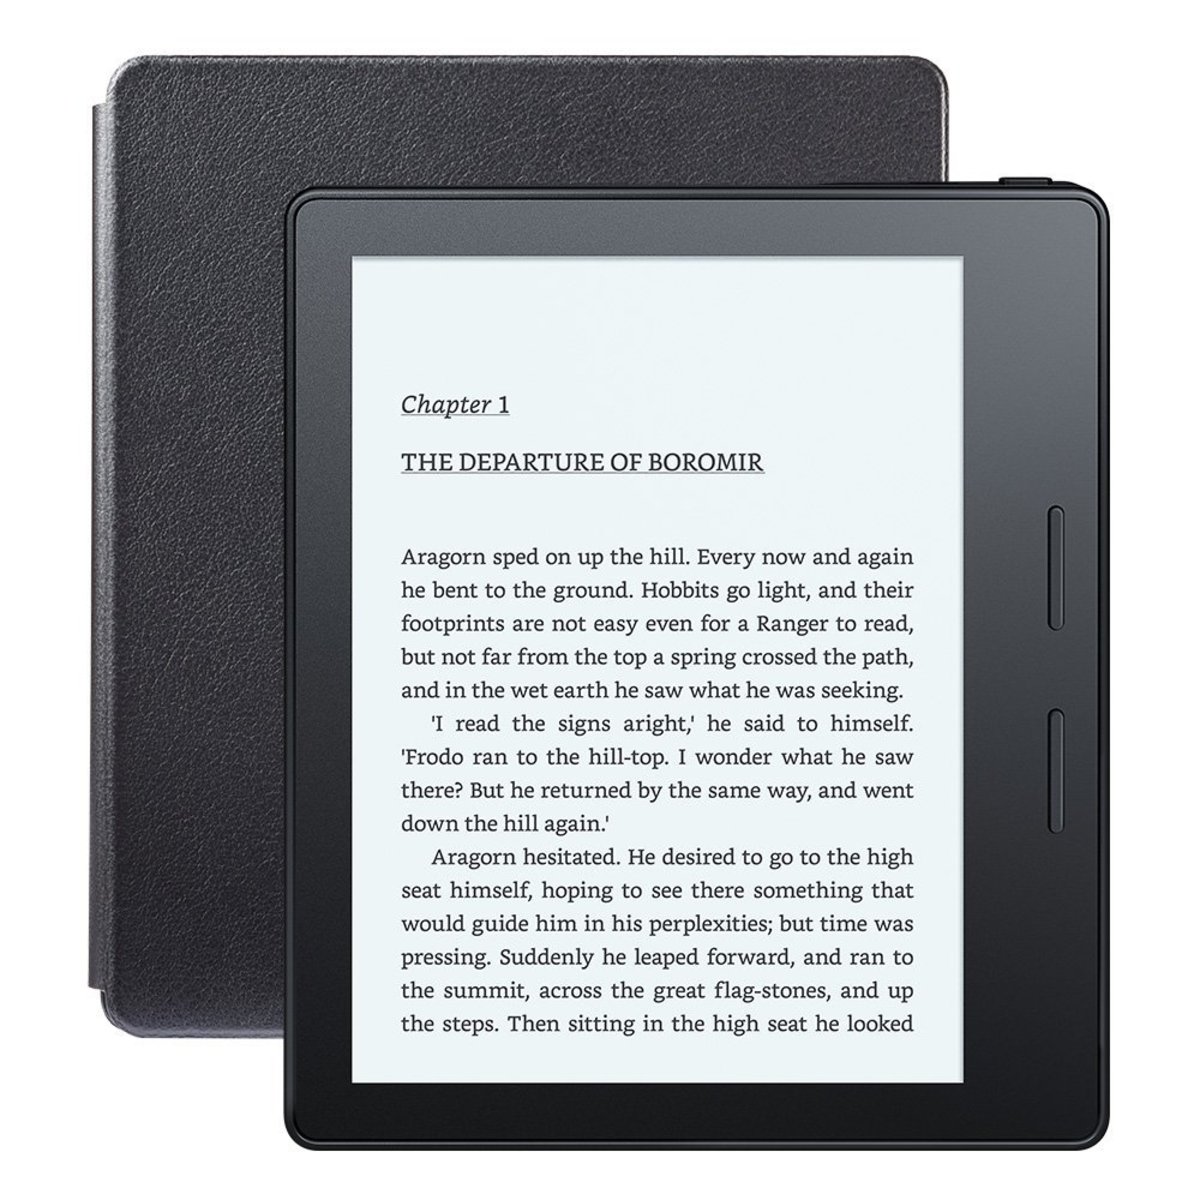 Amazon's newest Kindle sets the bar once again for ereaders Acquire